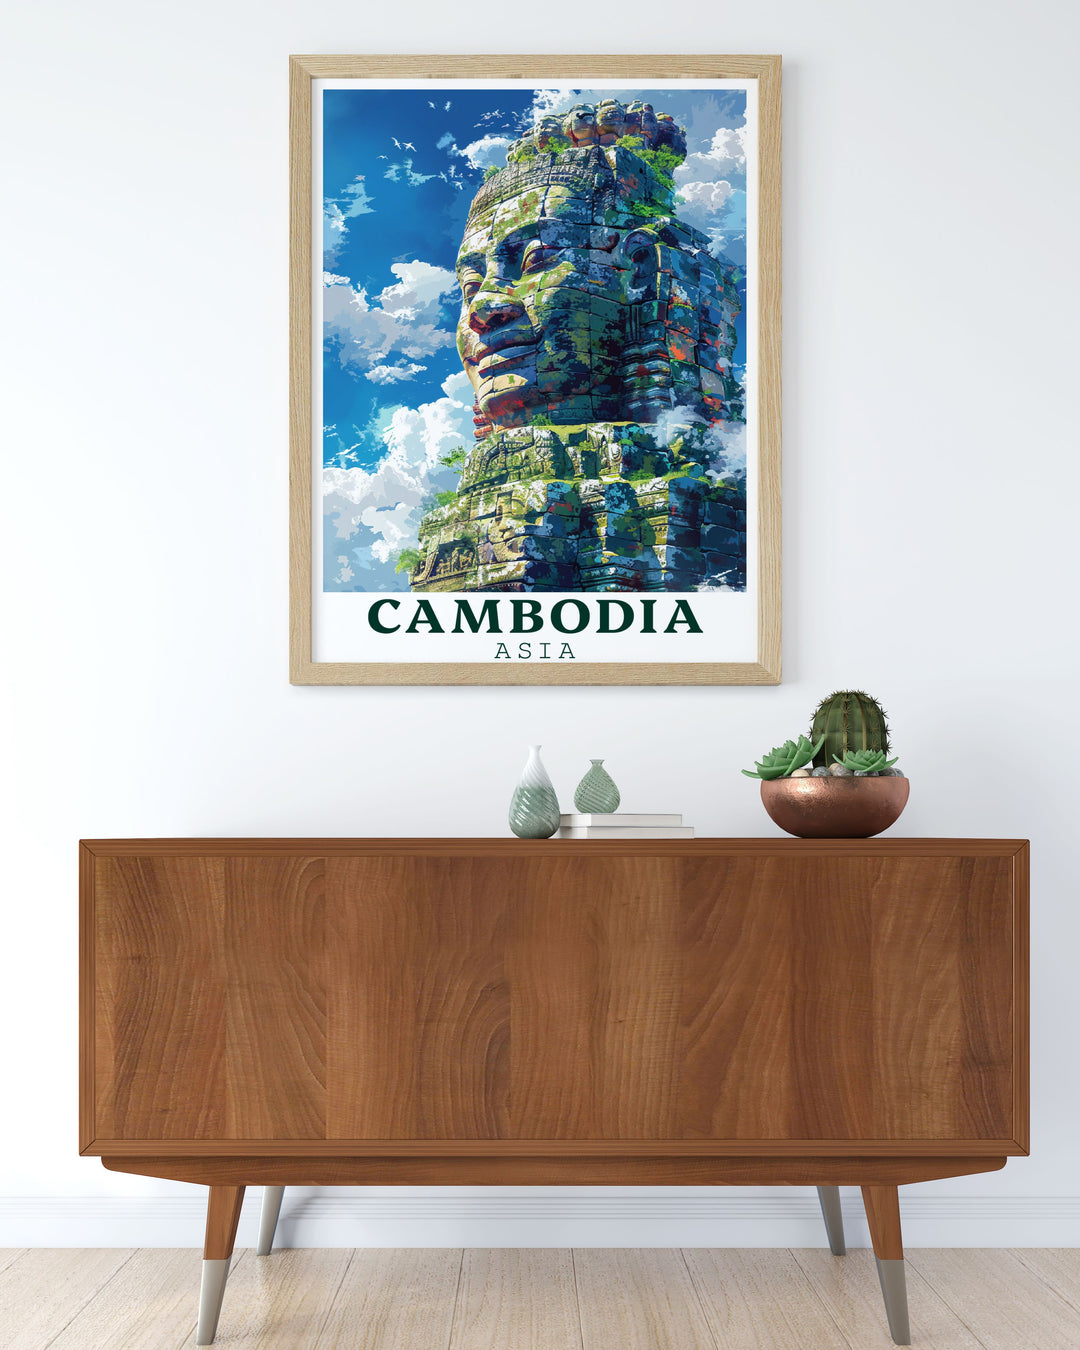 Unique Cambodia poster showcasing Bayon Temple in a classic black and white vintage style ideal for history enthusiasts and art lovers alike.